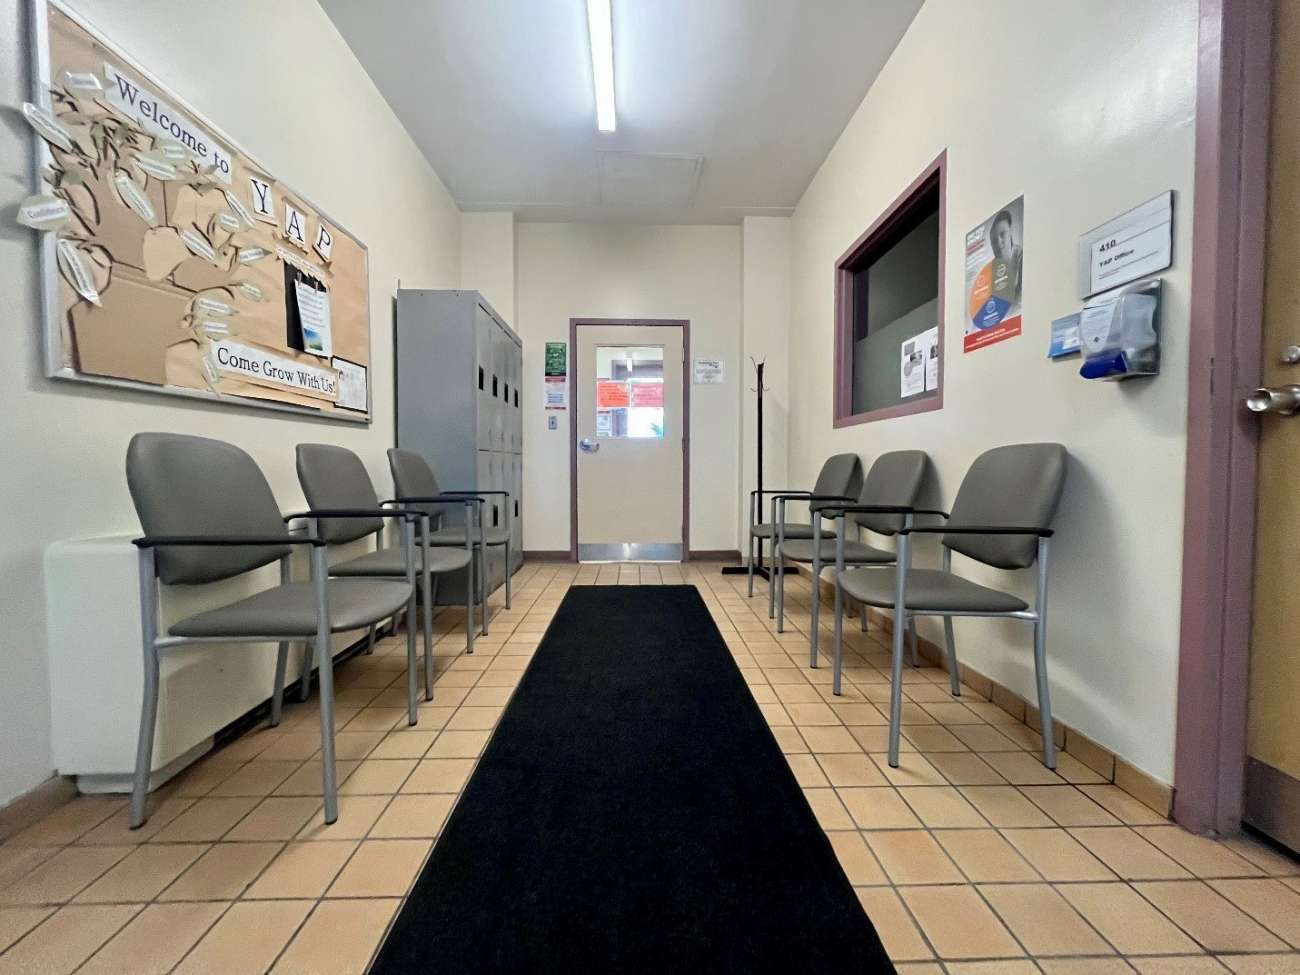 Hallway outside the young adult program (YAP) treatment spaces